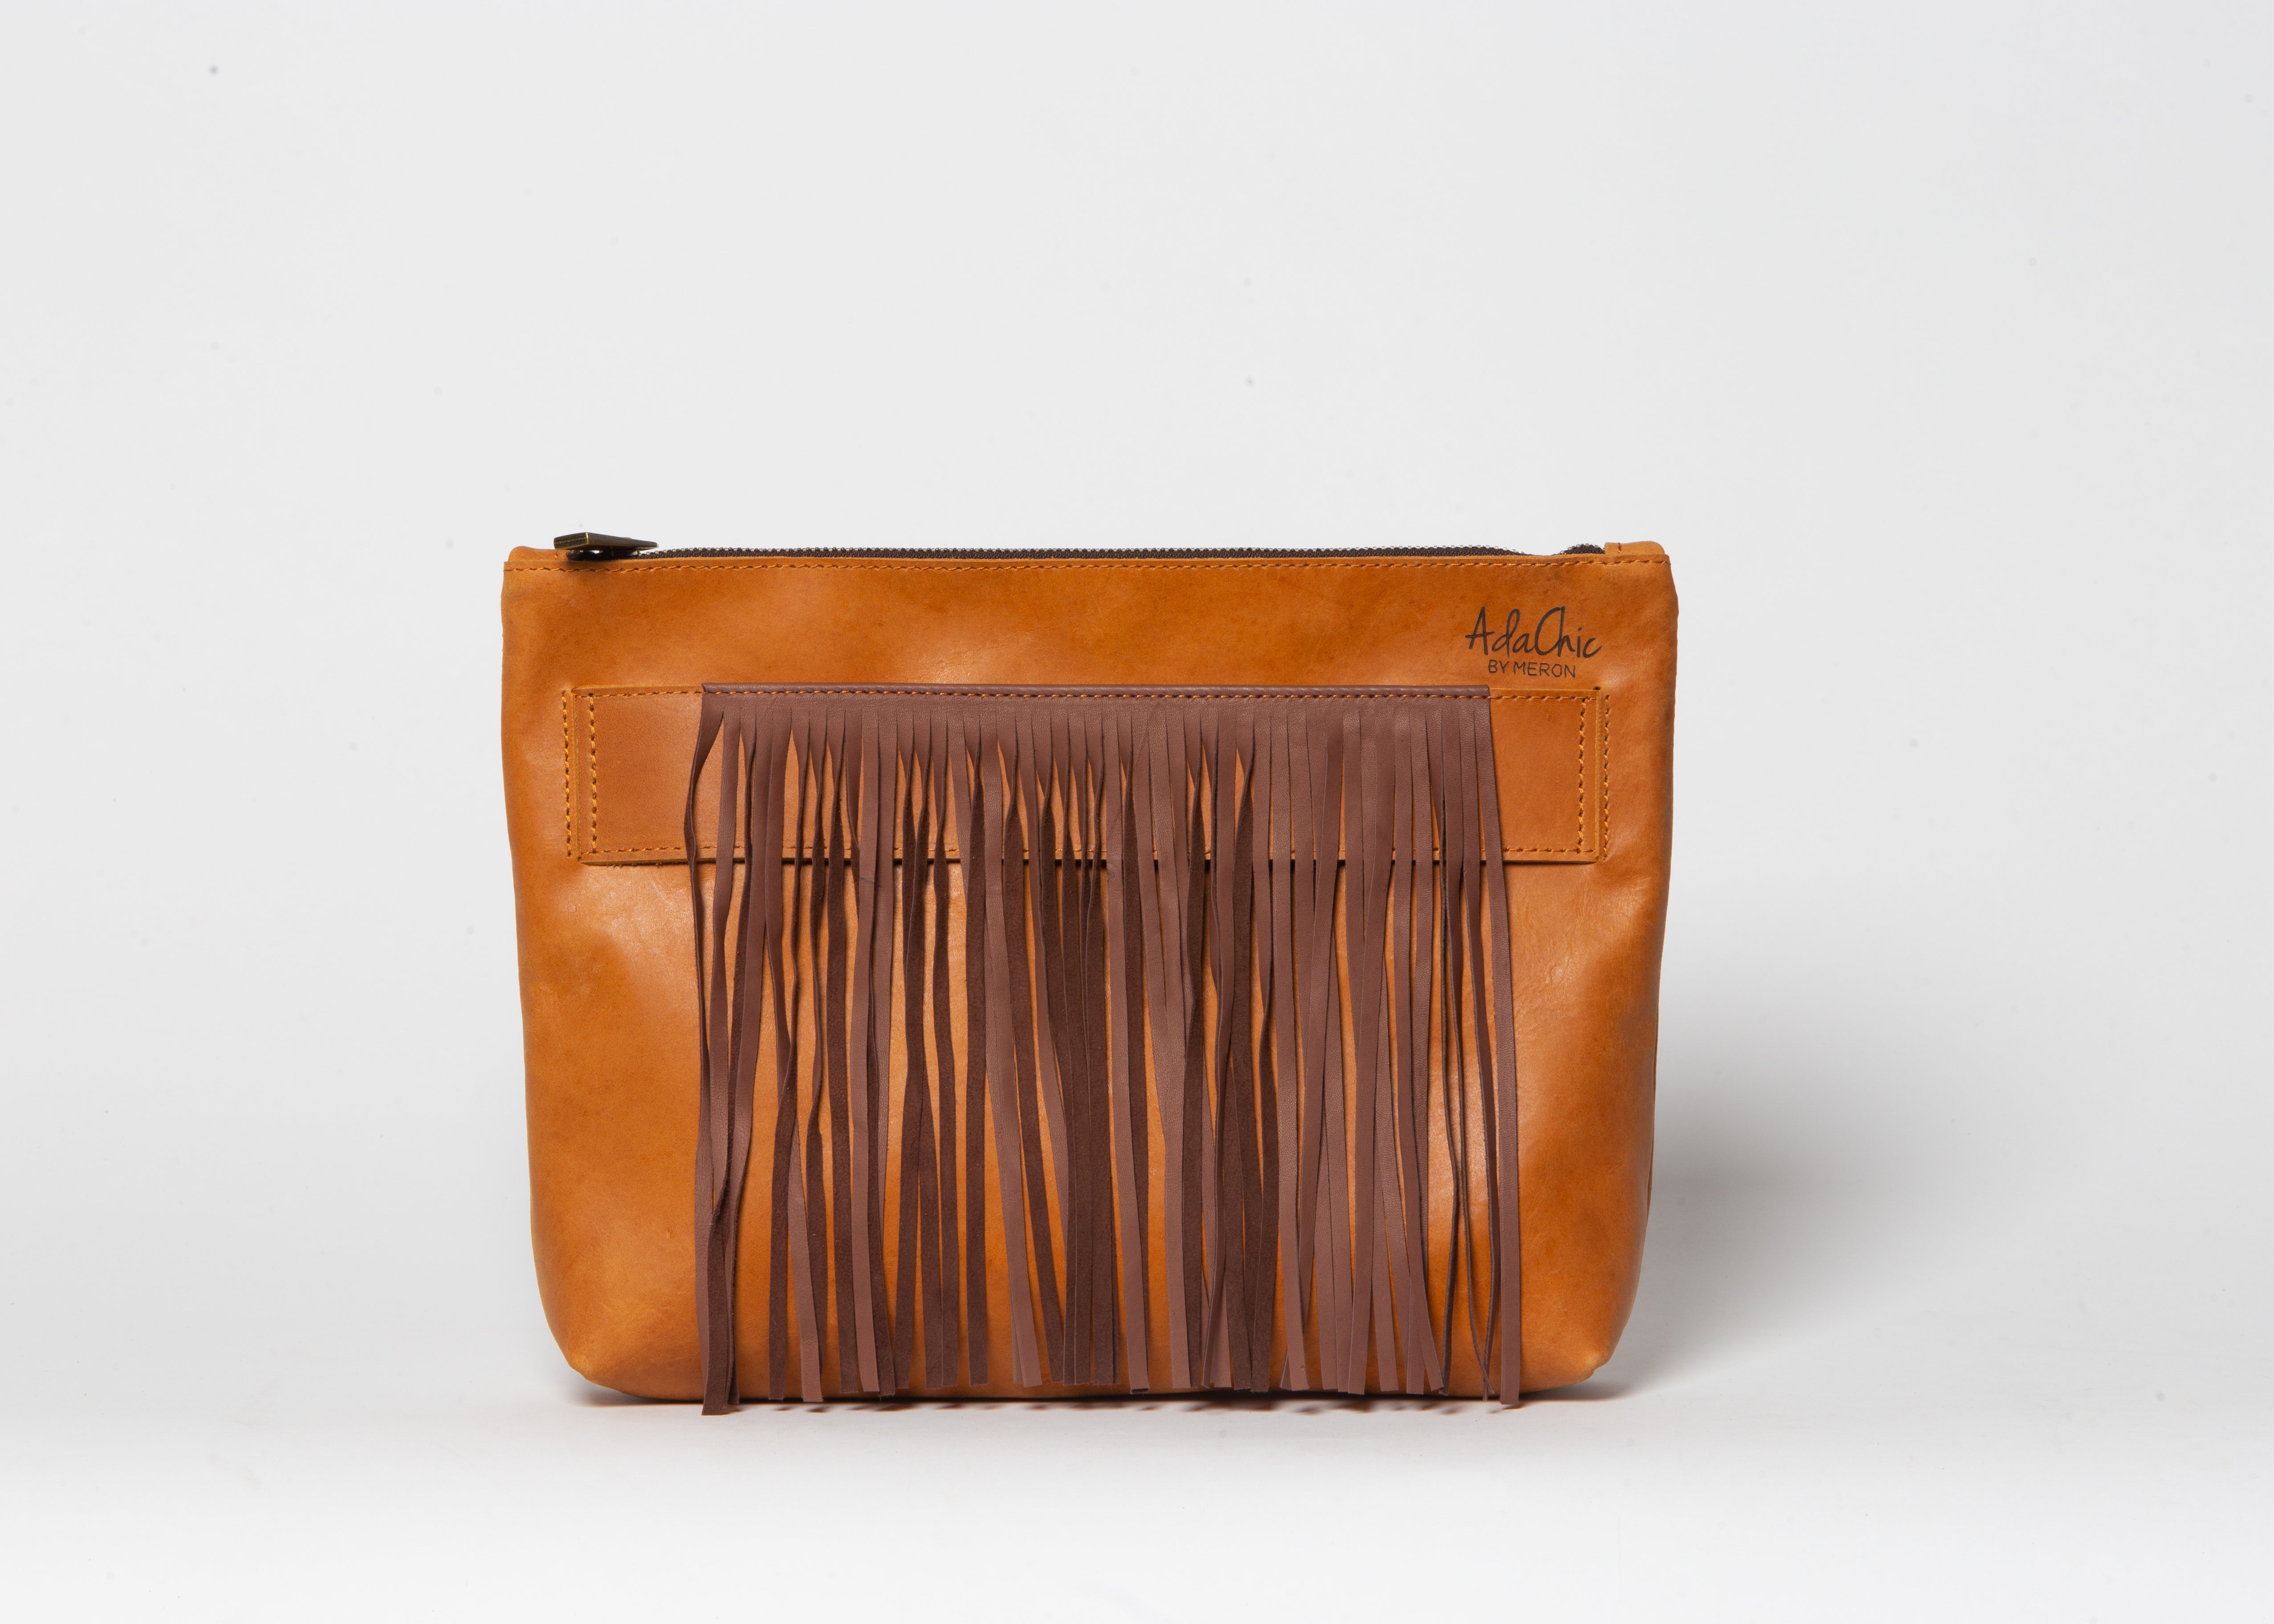 The Ola Hand Clutch With Fringe